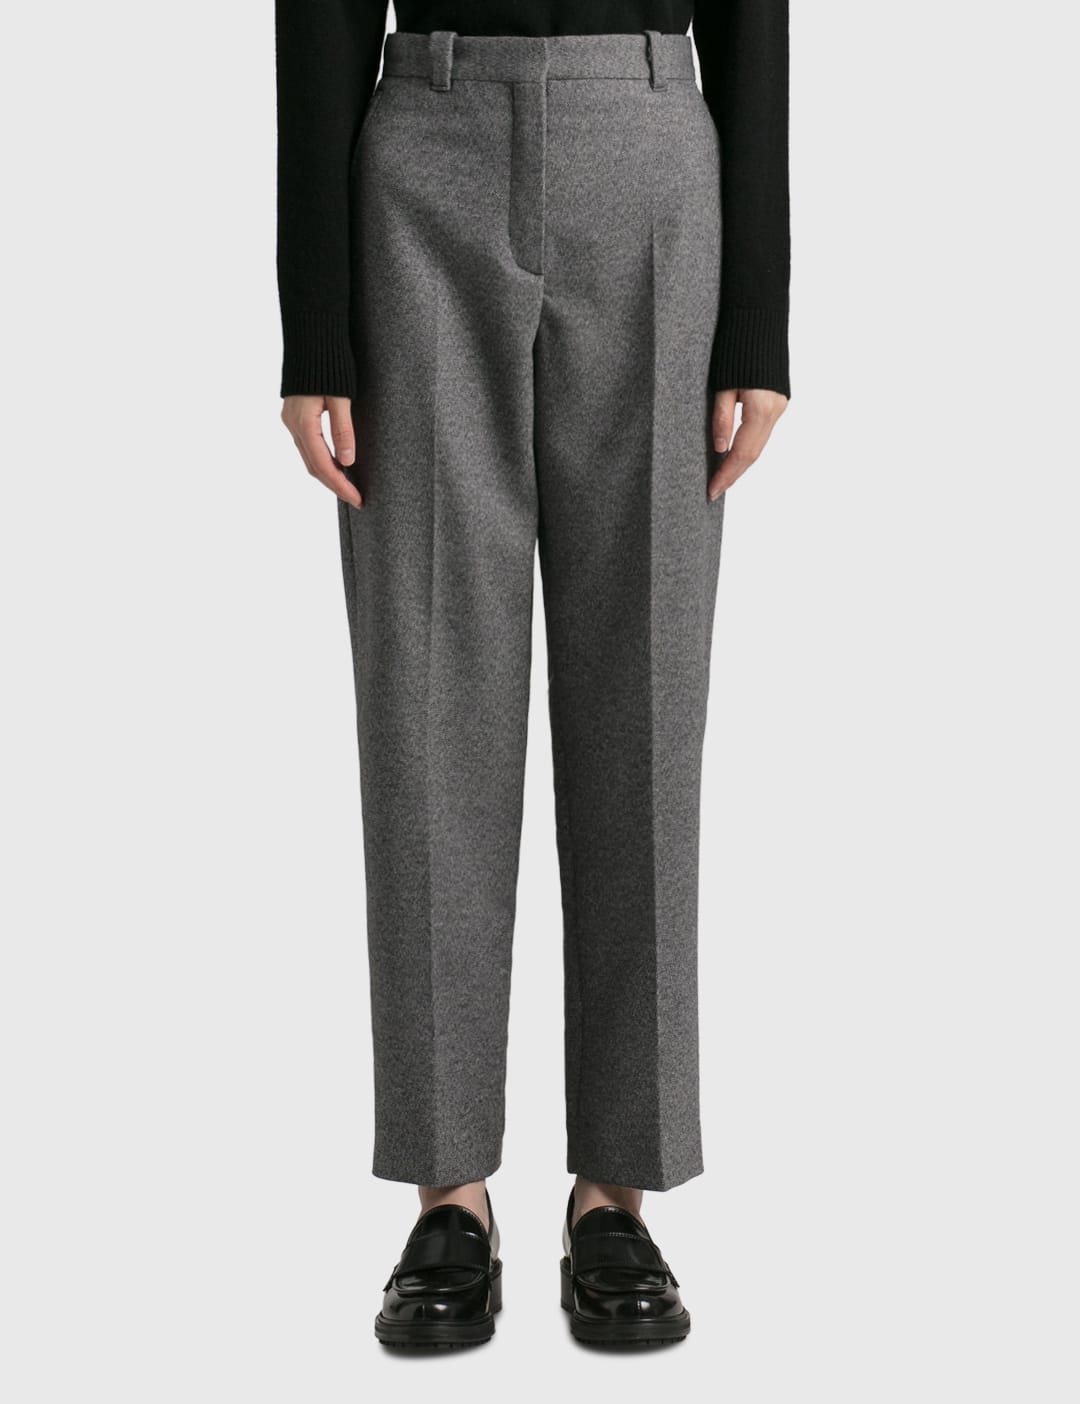 Fendi Iconic Tailored Cropped Flared Suit Pants Trousers Wool New L | eBay